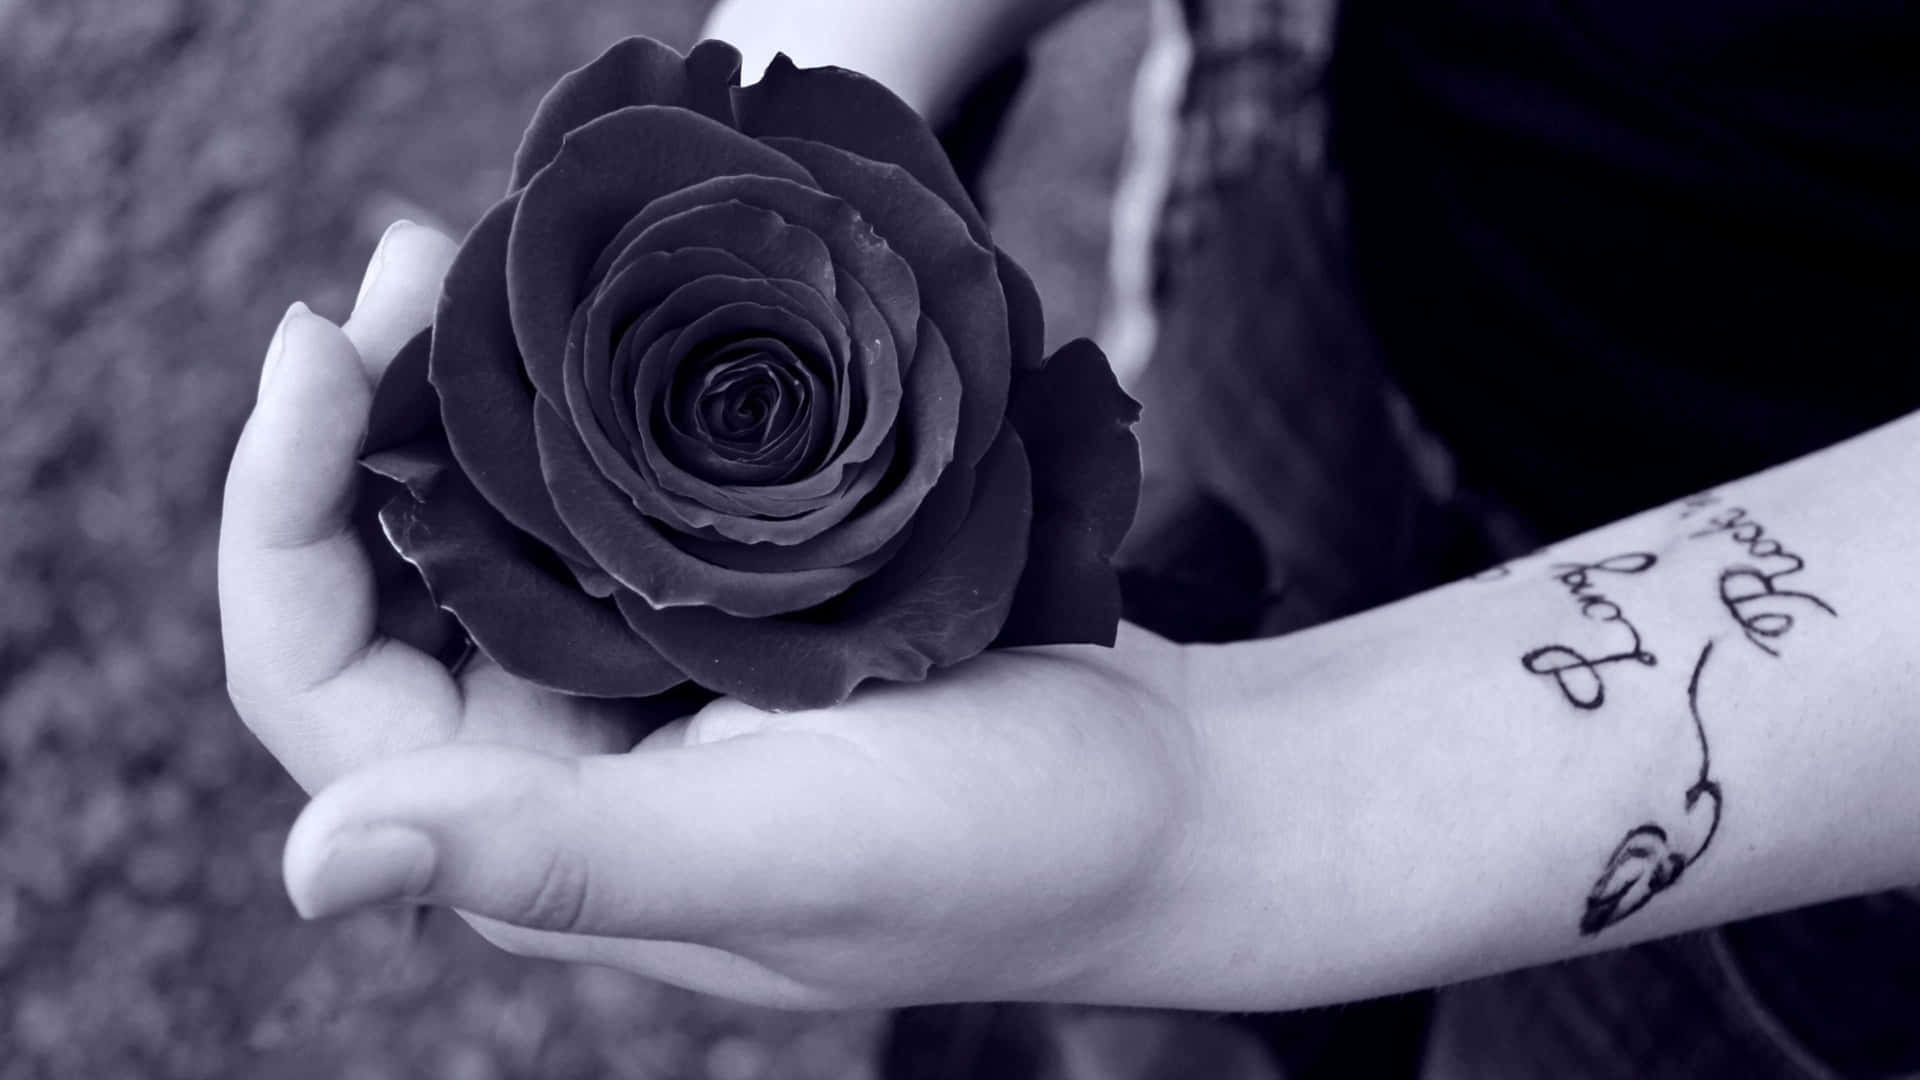 The mysterious beauty of a black rose in all its glory.